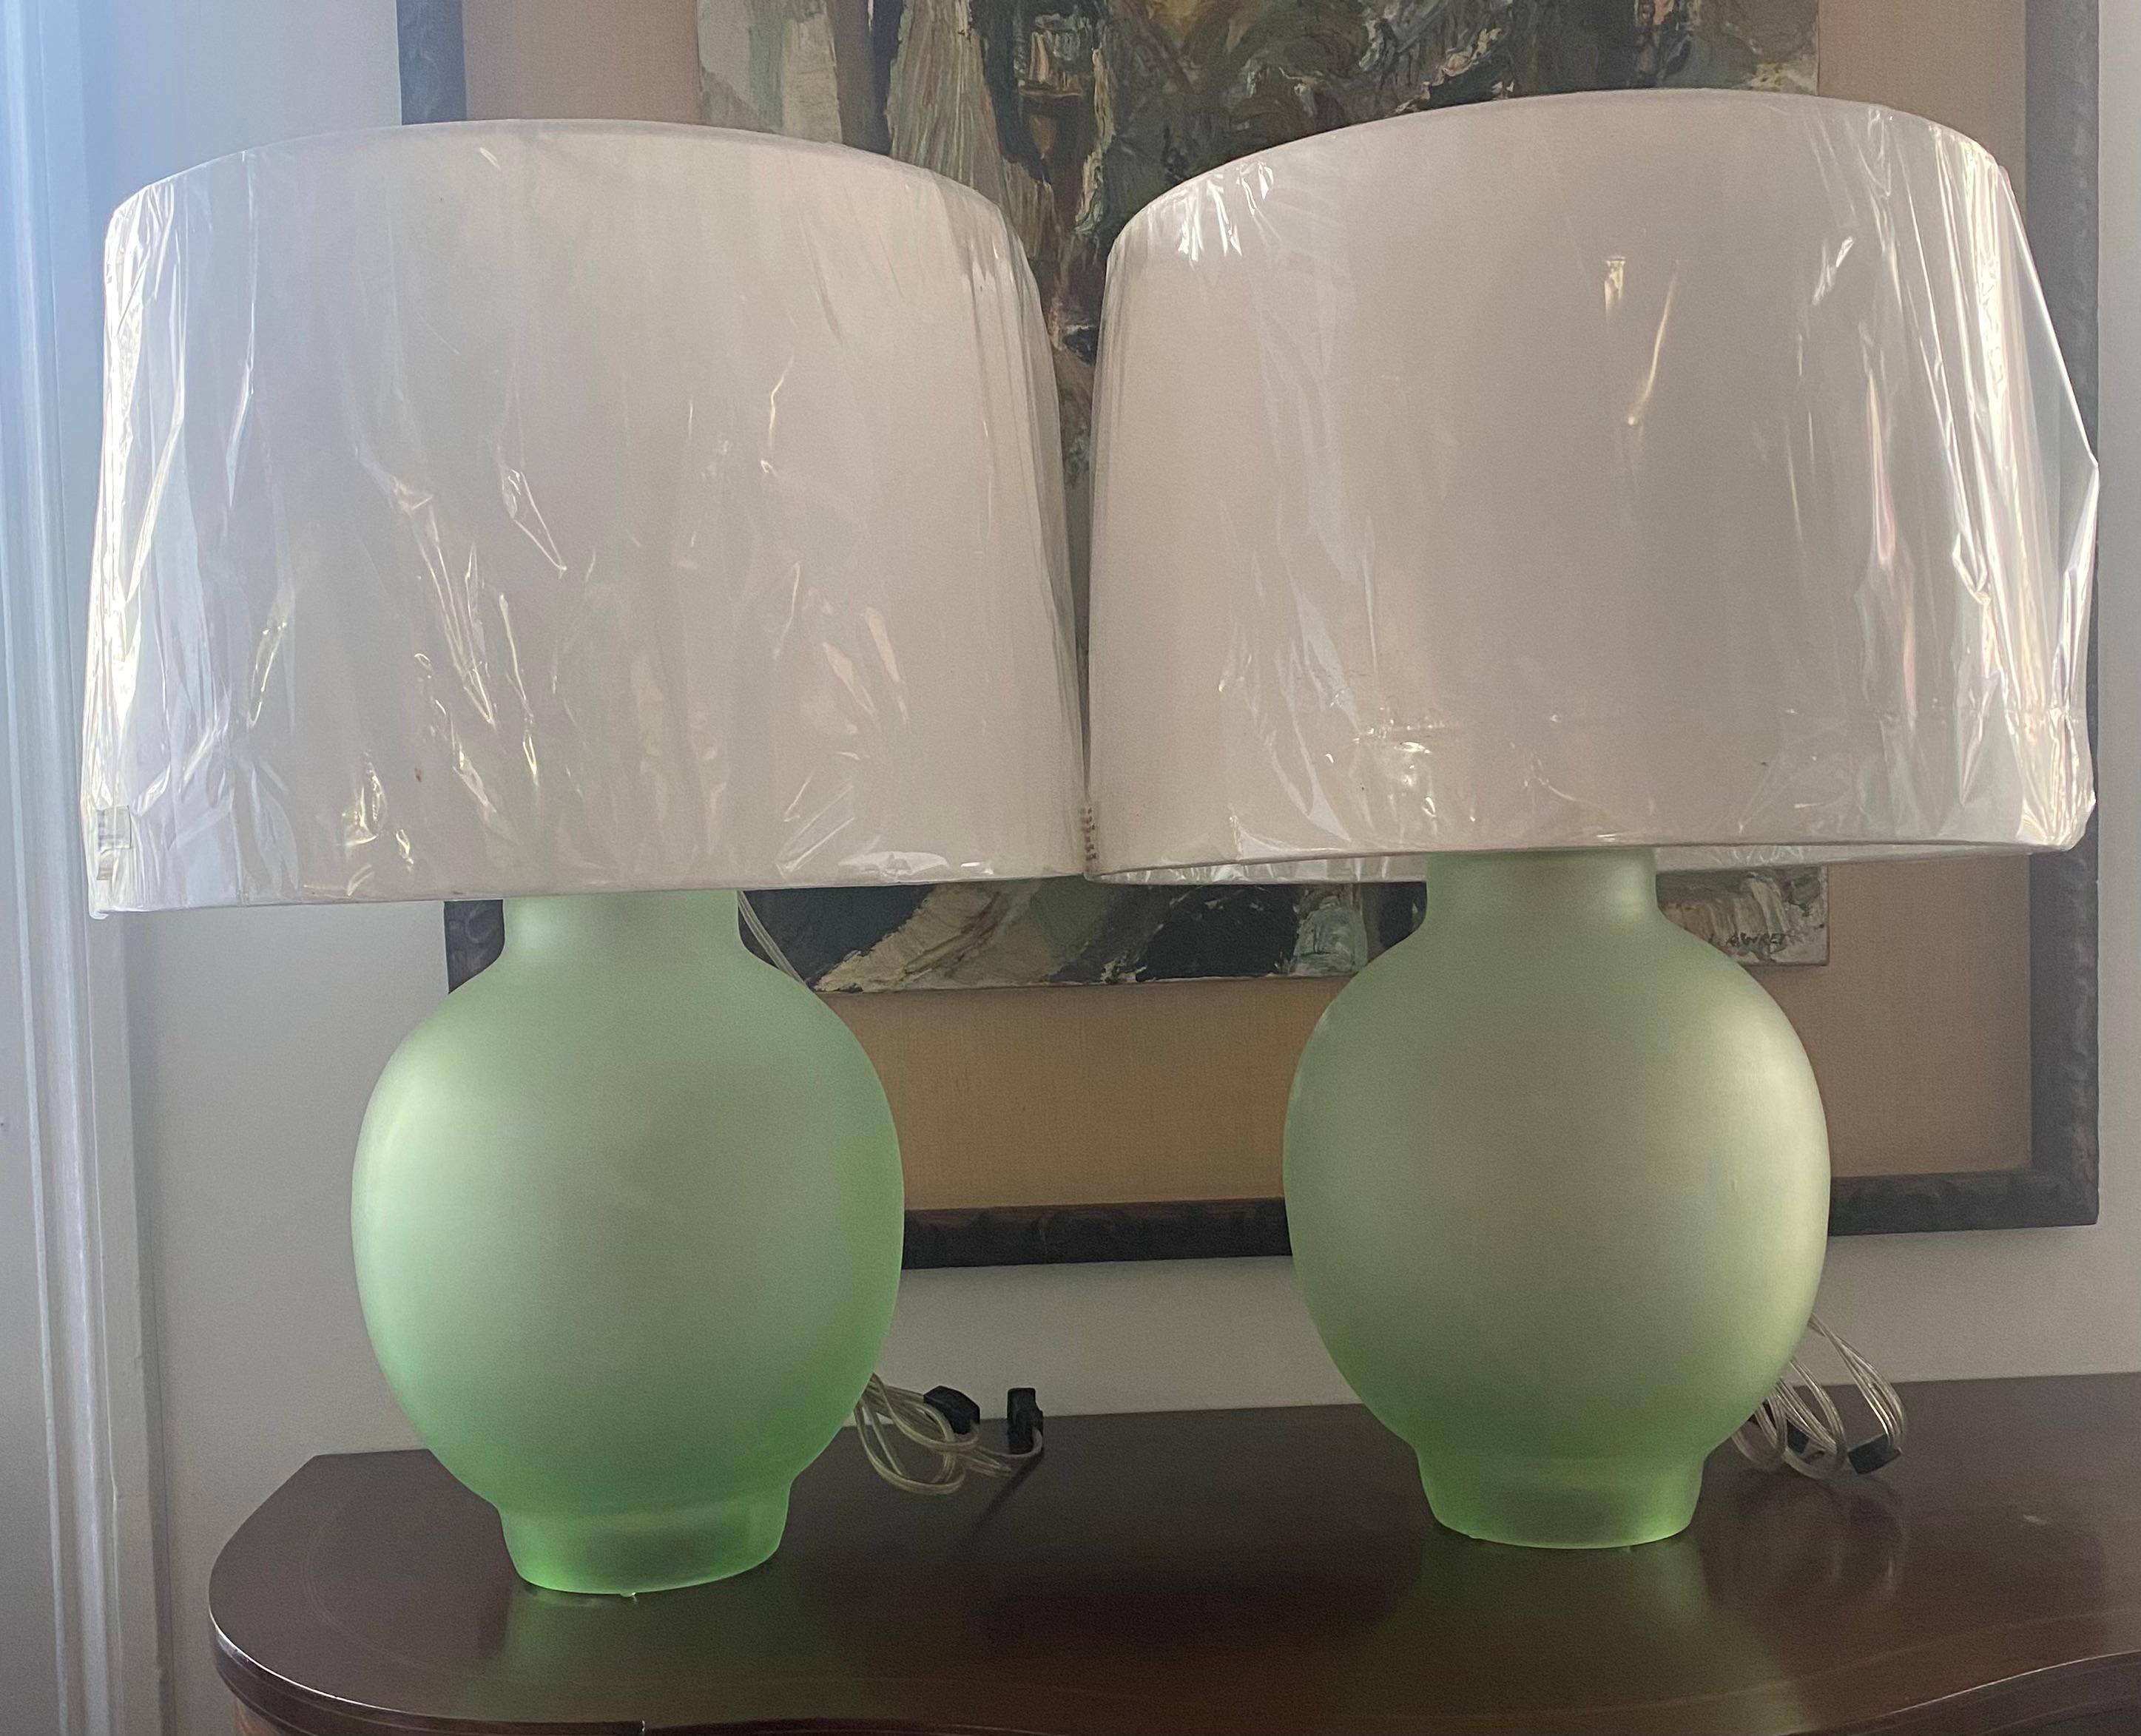 Amazing pair of frosted green table lamps - glass body is approx 11 inches diameter x 15 inches high plus 10-14 inch adjustable shade holder.
Shades photographed measure approx 18 inches diameter x 13 inches high.
Shades can be included but add to